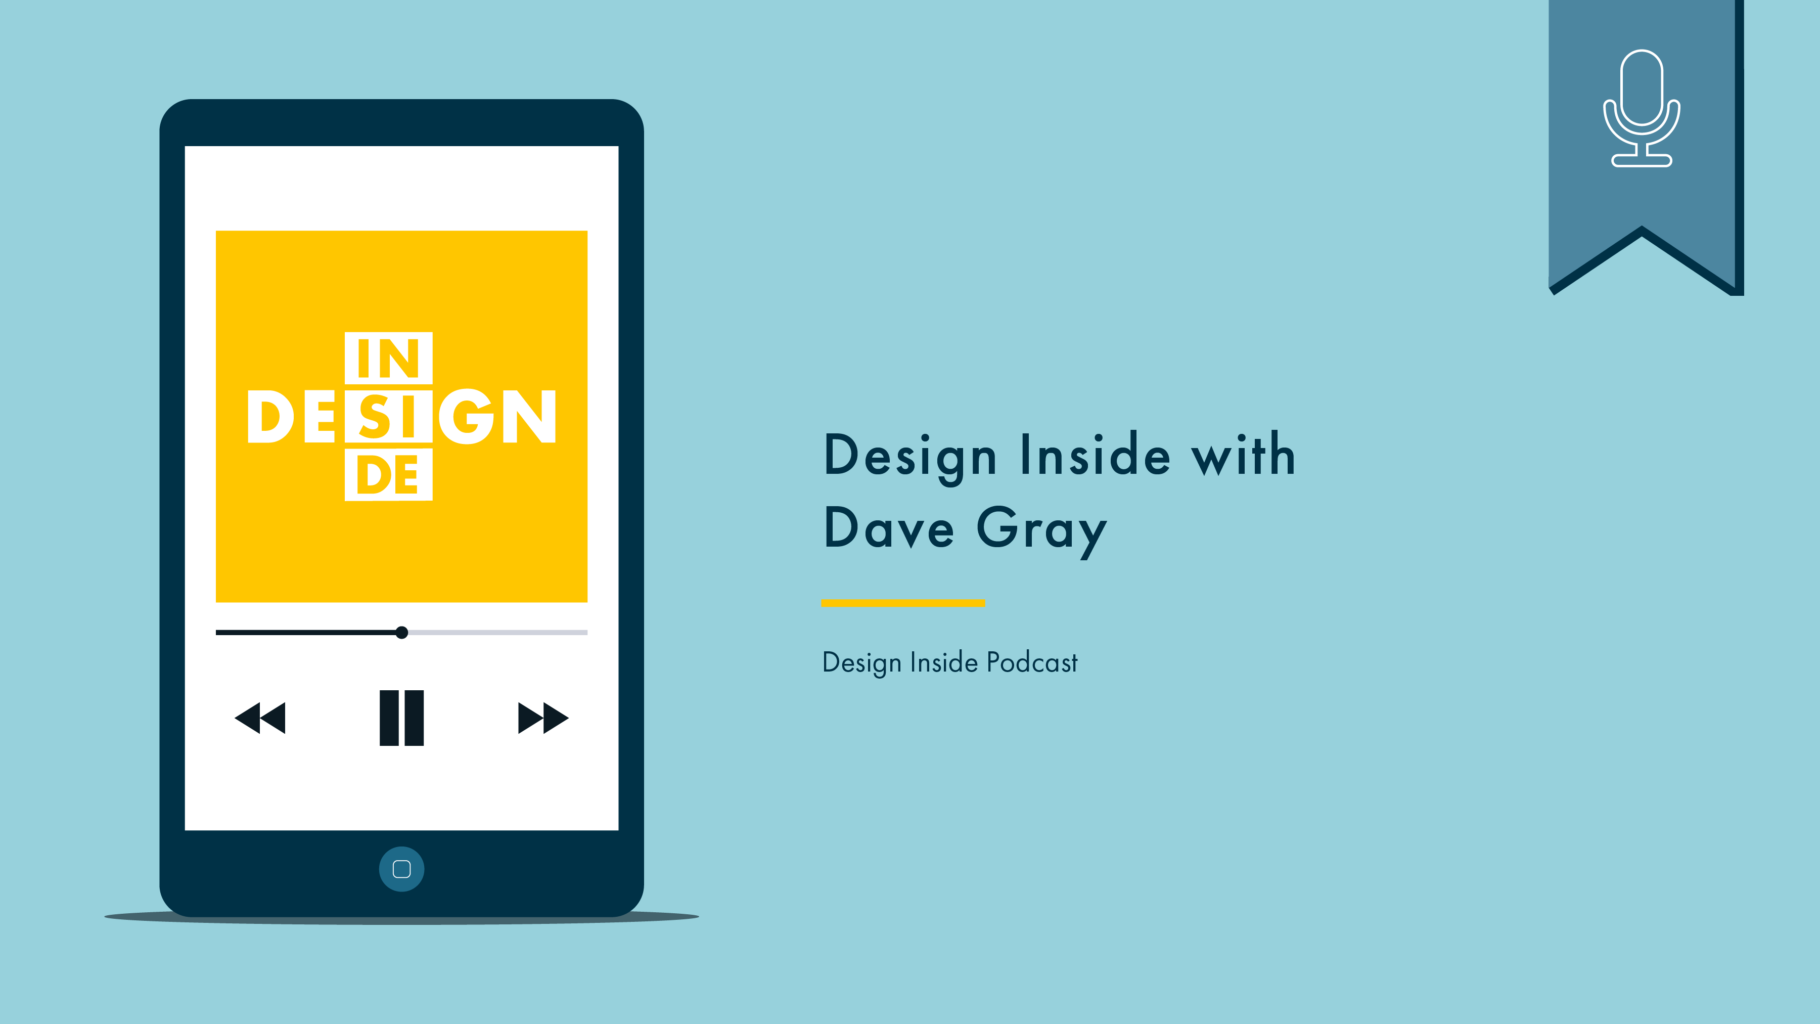 Phone with podcast artwork on the left. On the right reads “Design Inside with Dave Gray, Design Inside Podcast.” Above is a blue flag with a white icon denoting that this is a podcast.